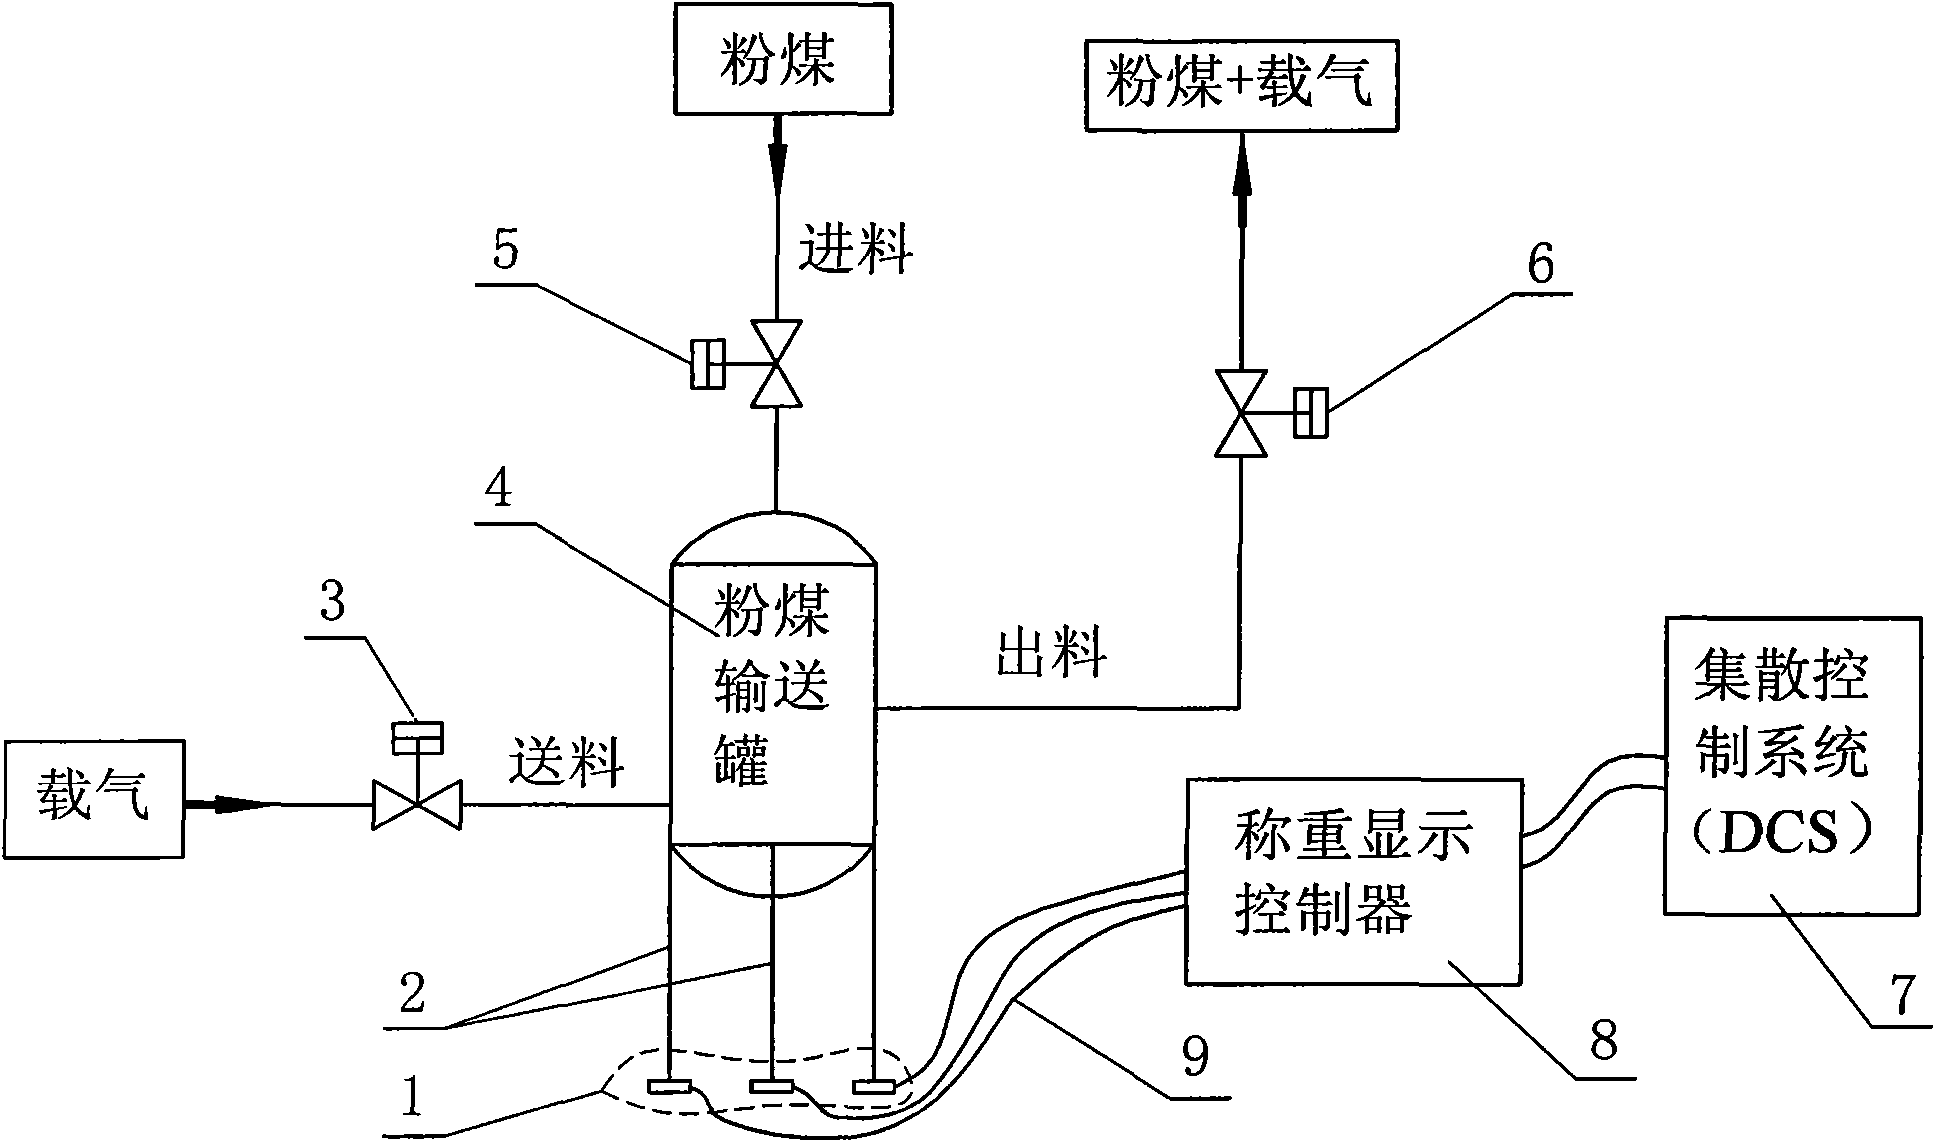 Method for automatically accumulating conveying capacity in powdered coal conveying process